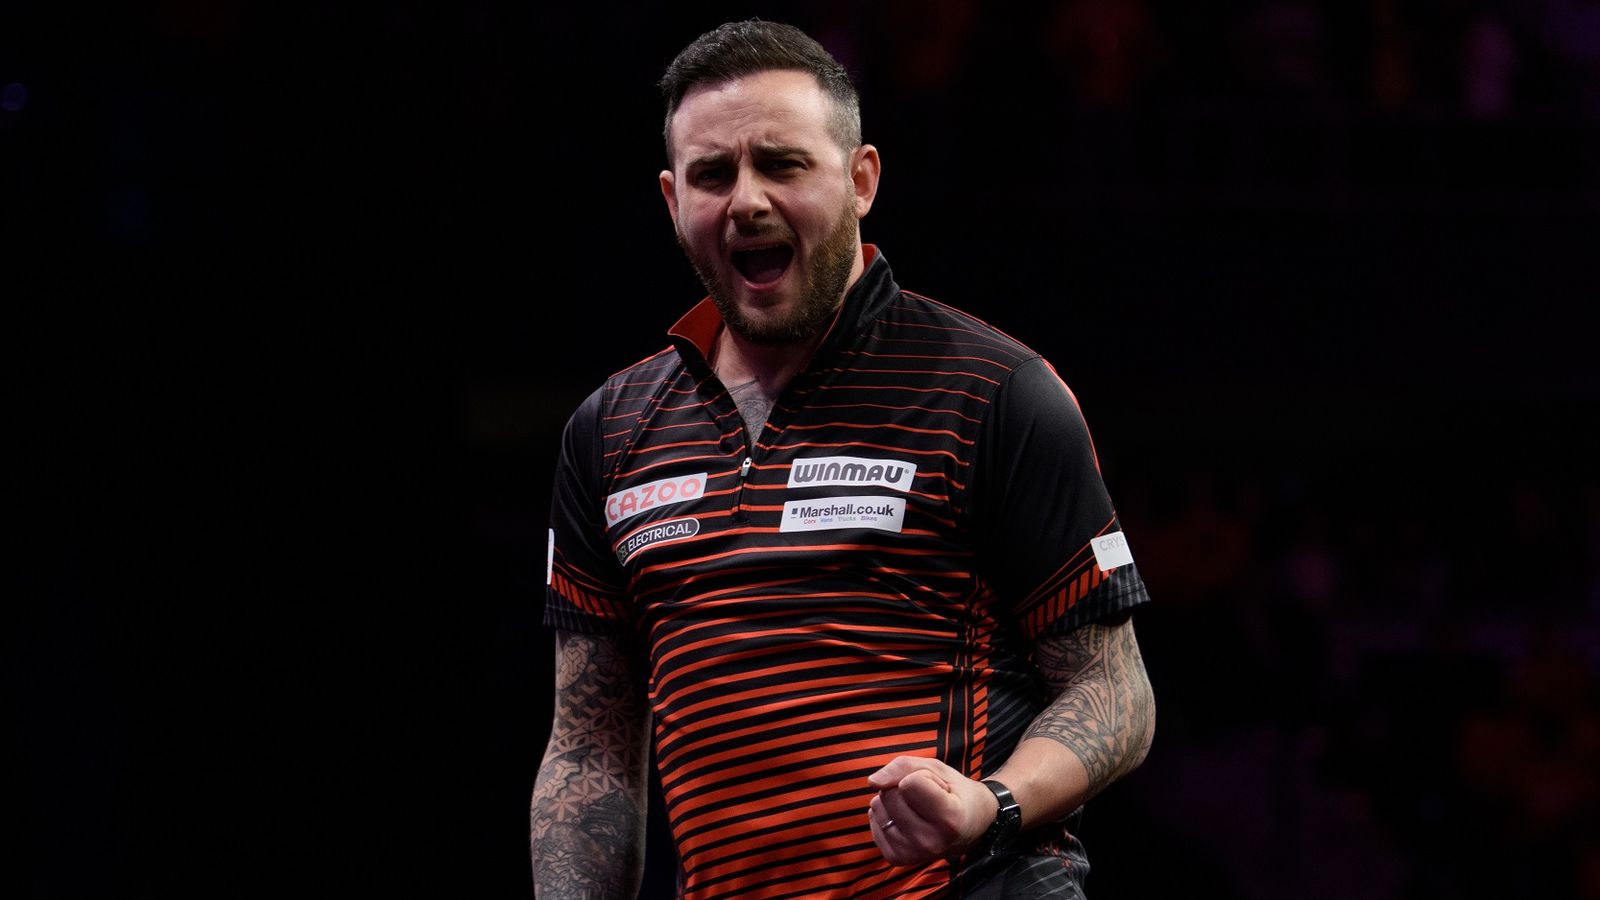 Premier League Darts: Joe Cullen beats Gary Anderson, Peter Wright and Jonny Clayton in crucial victory in London